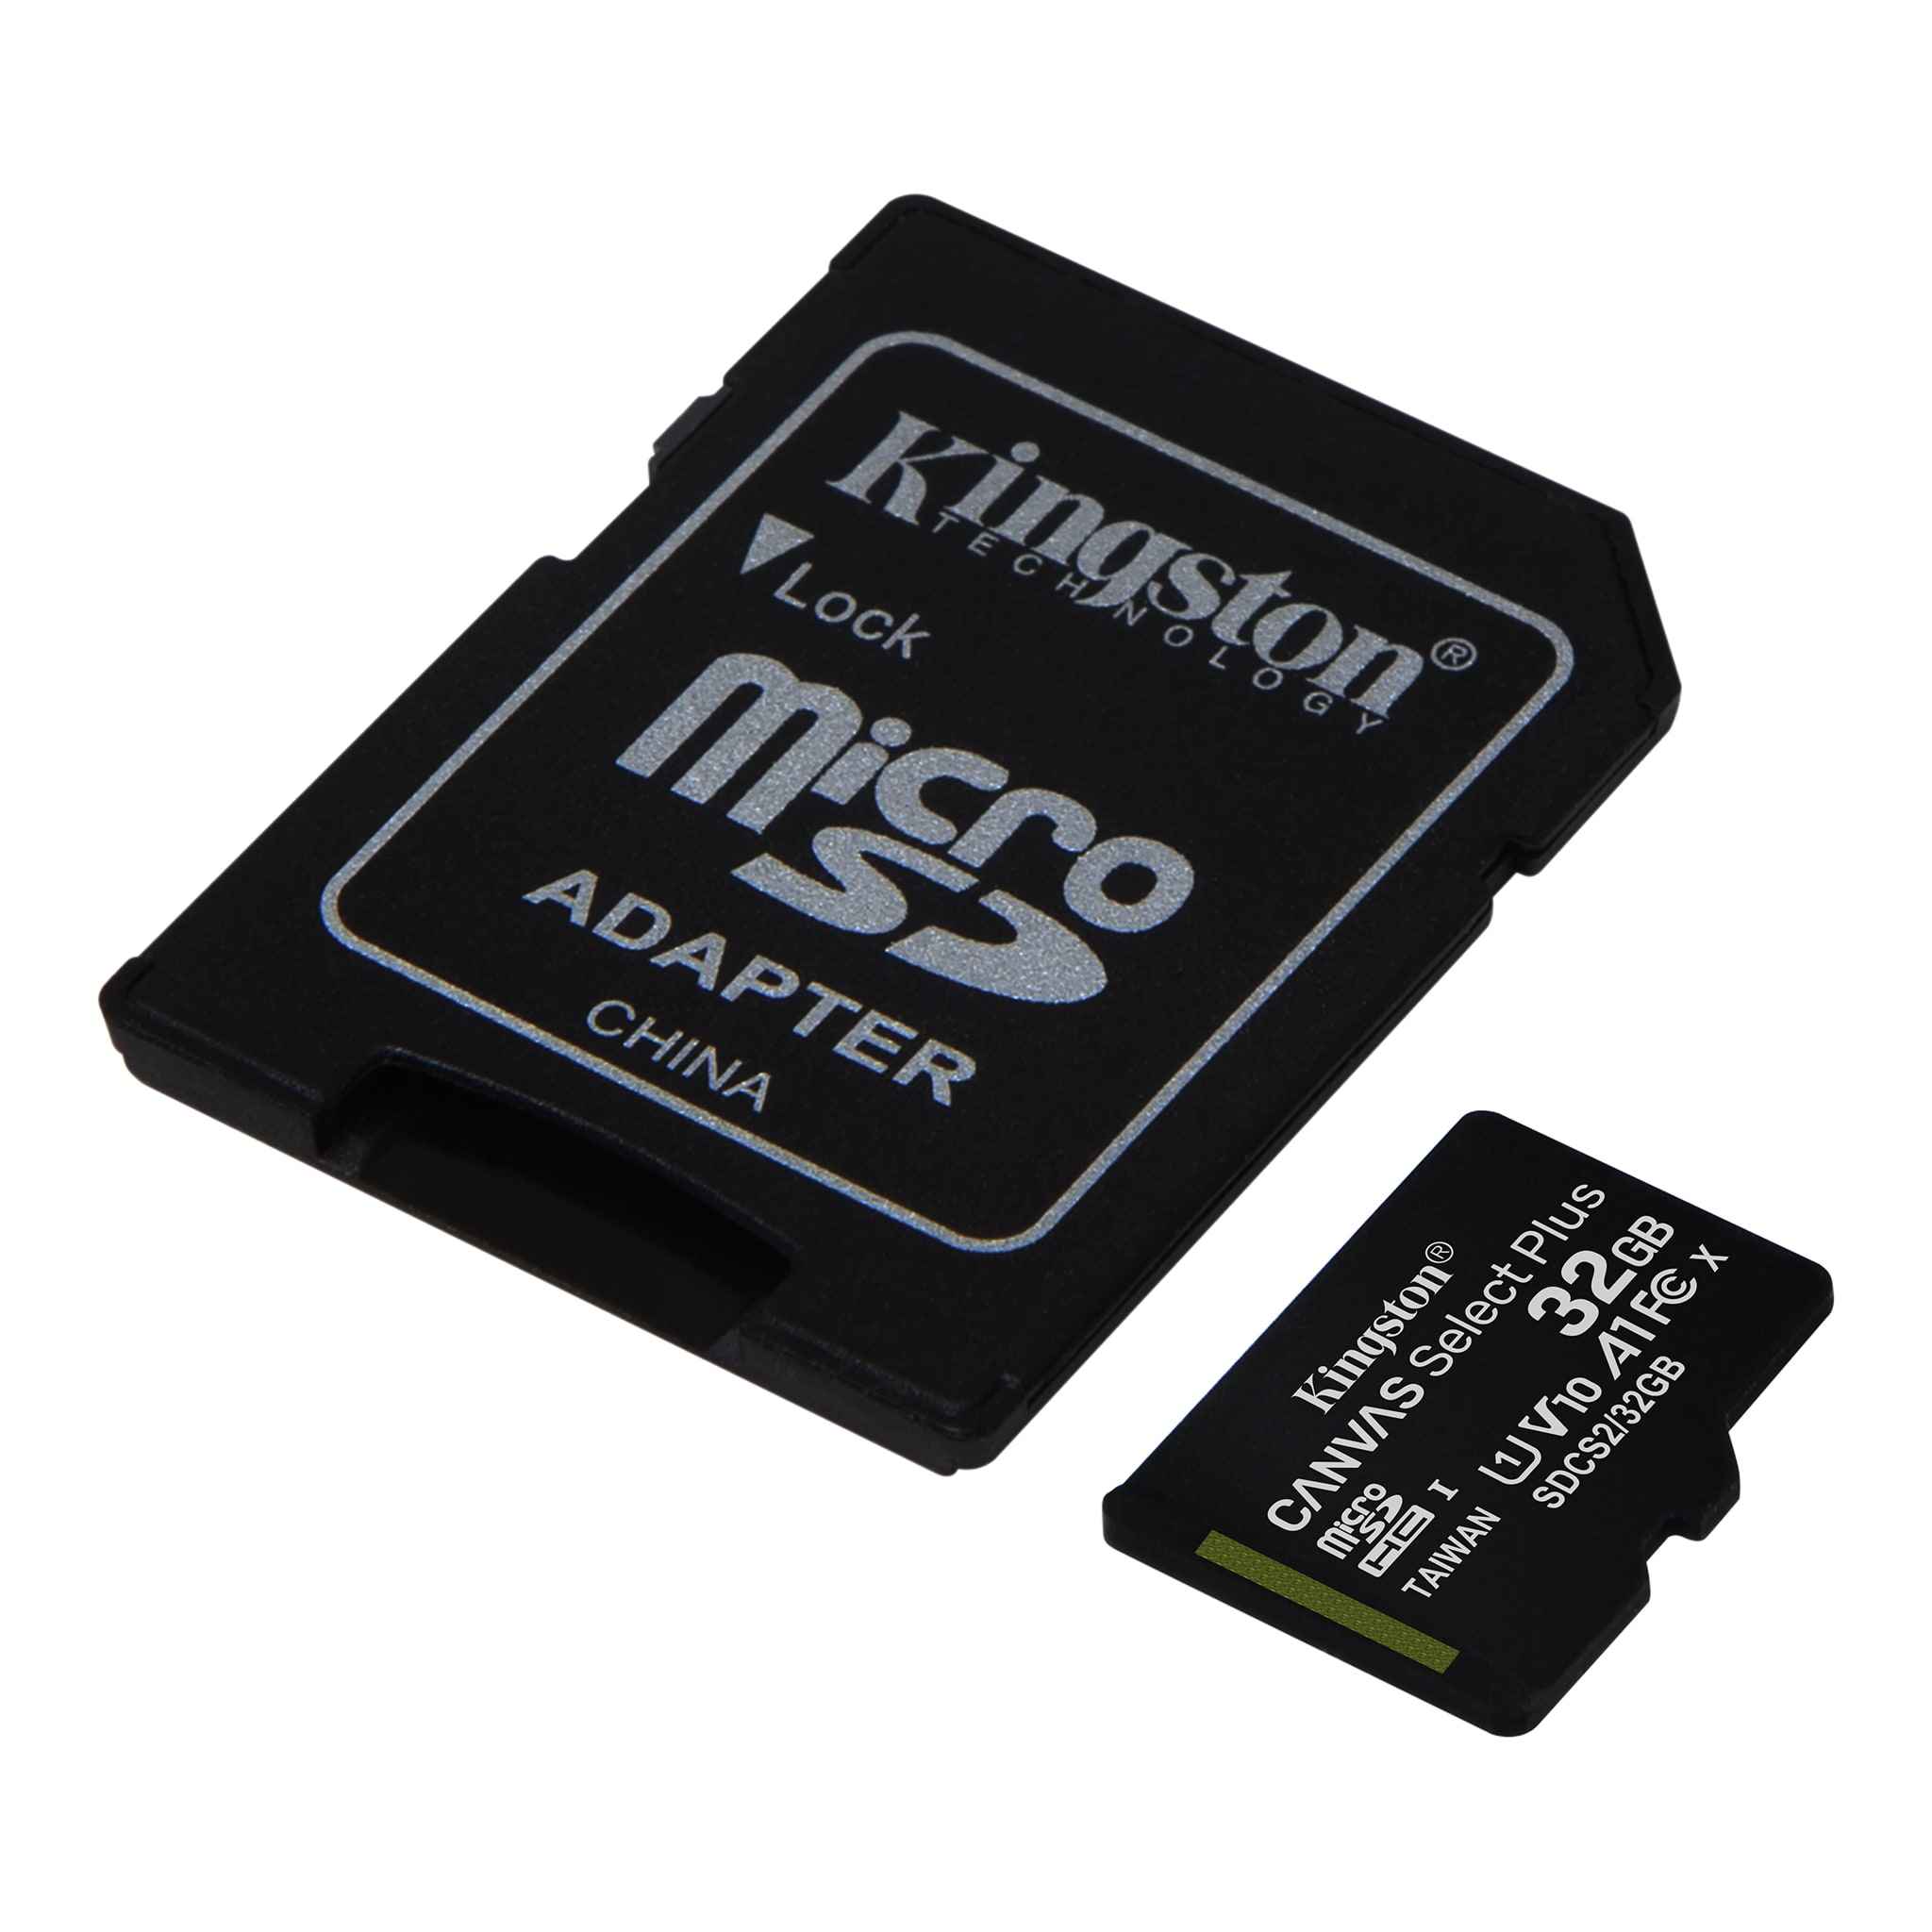 100MBs Works with Kingston Kingston 512GB Sony C2104 MicroSDXC Canvas Select Plus Card Verified by SanFlash.